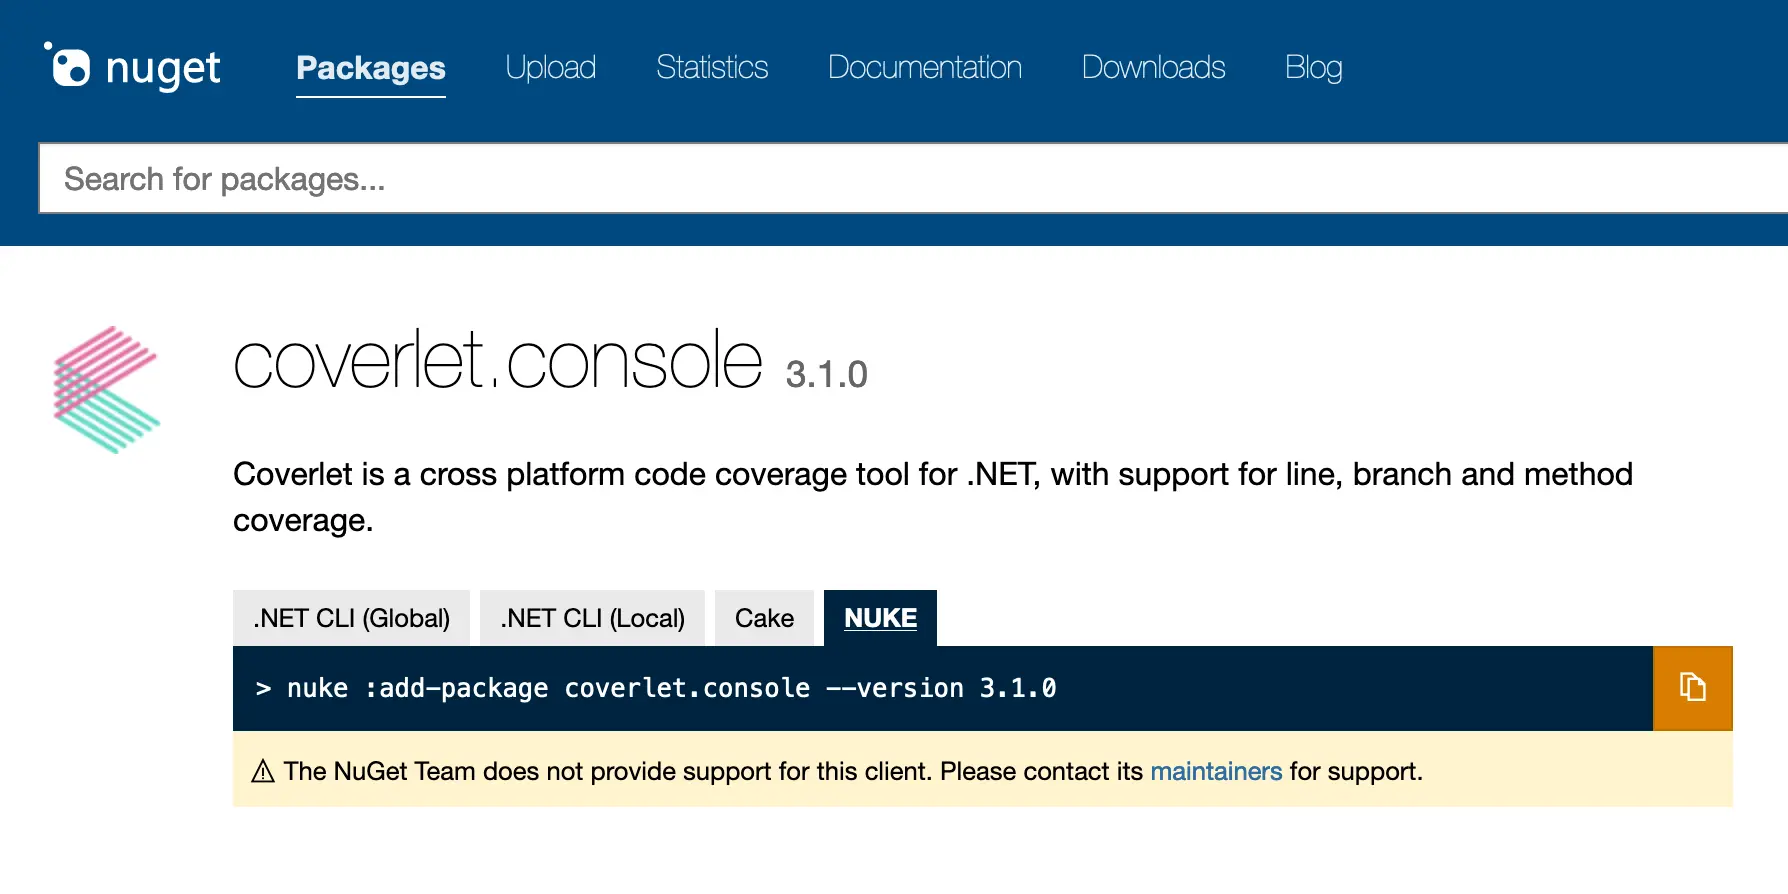 Adding packages from NuGet.org